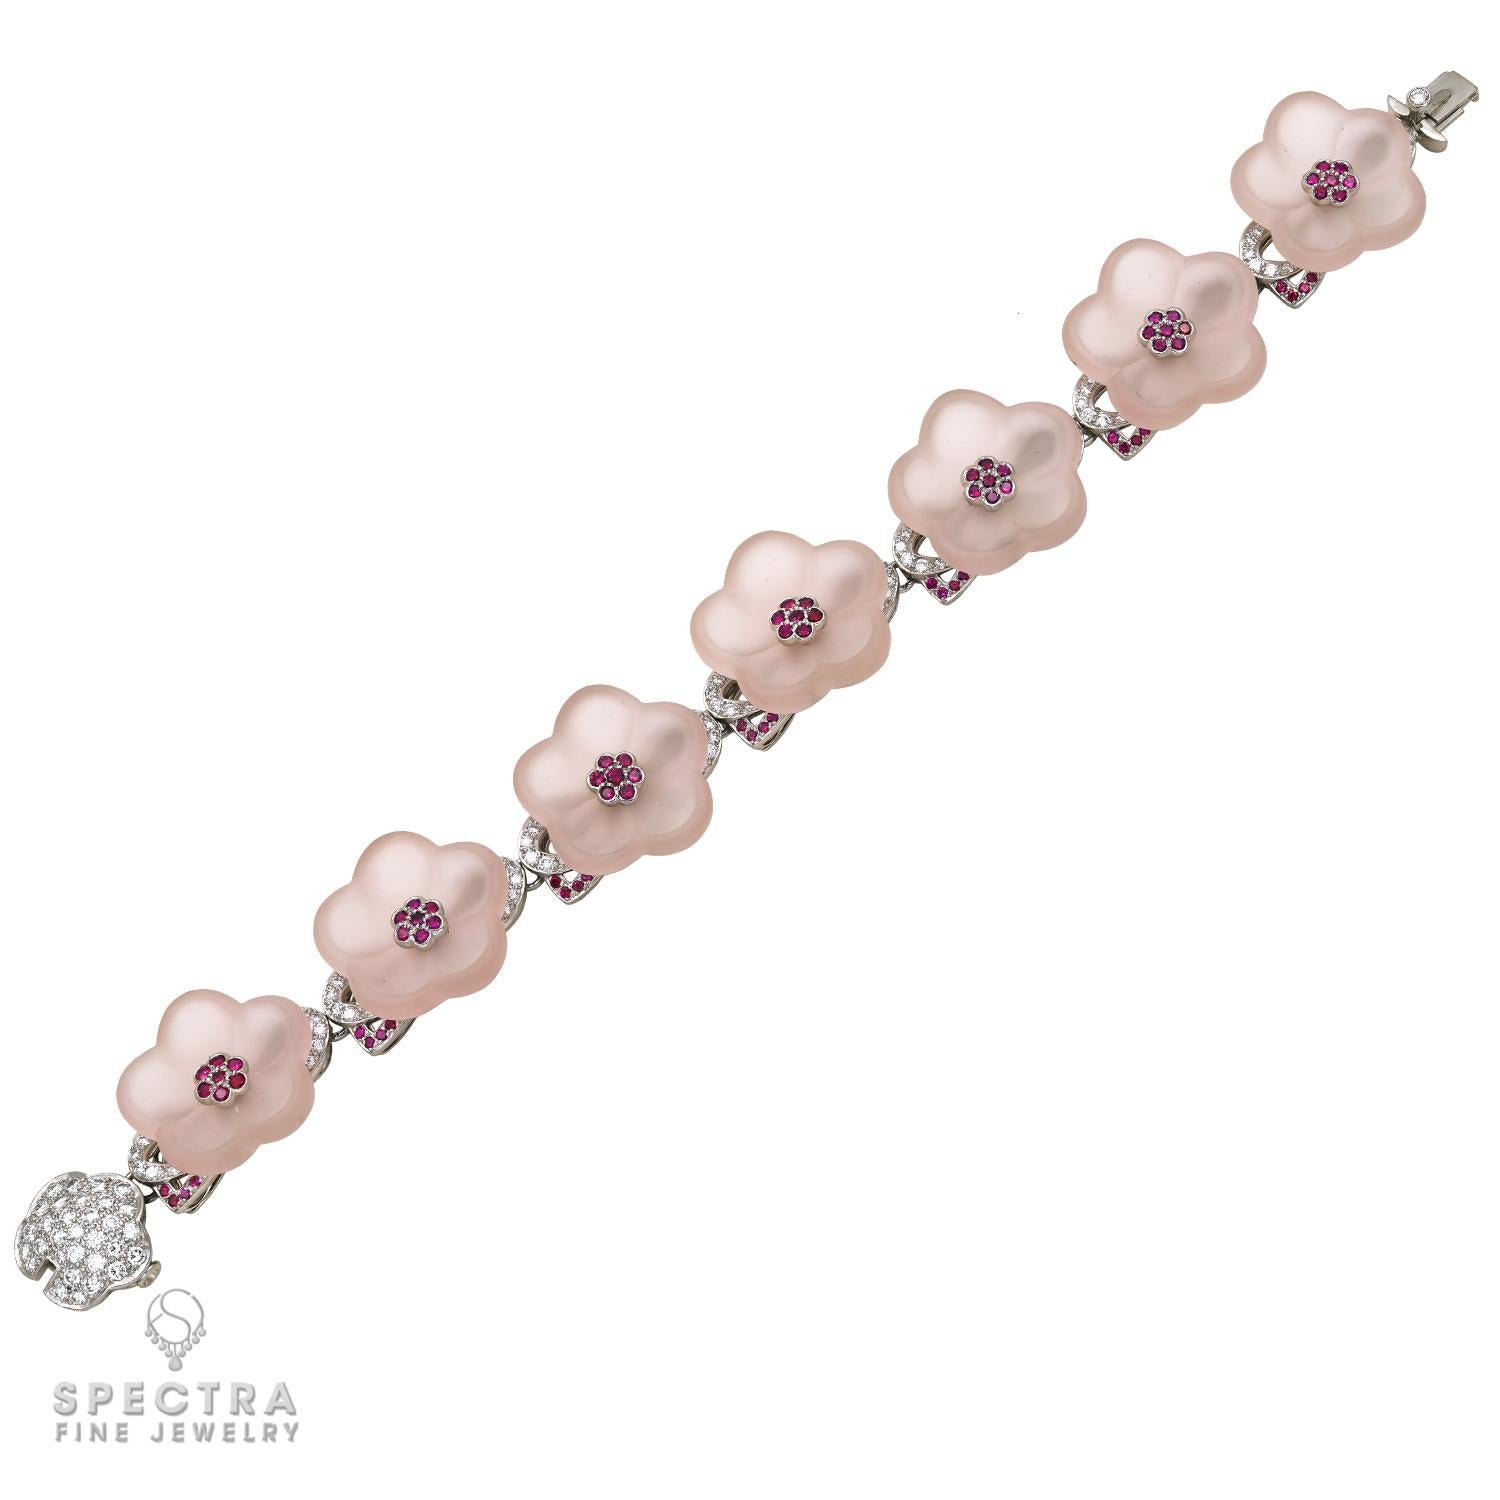 This pair of Tiffany & Co. Rock Crystal Quartz Diamond Flower Bracelets, made in the 21st century, circa 2000, features two varieties of quartz -- rose quartz and chalcedony -- carved to elegant perfection. The pair of 7.5-inch-long (19.05 cm)